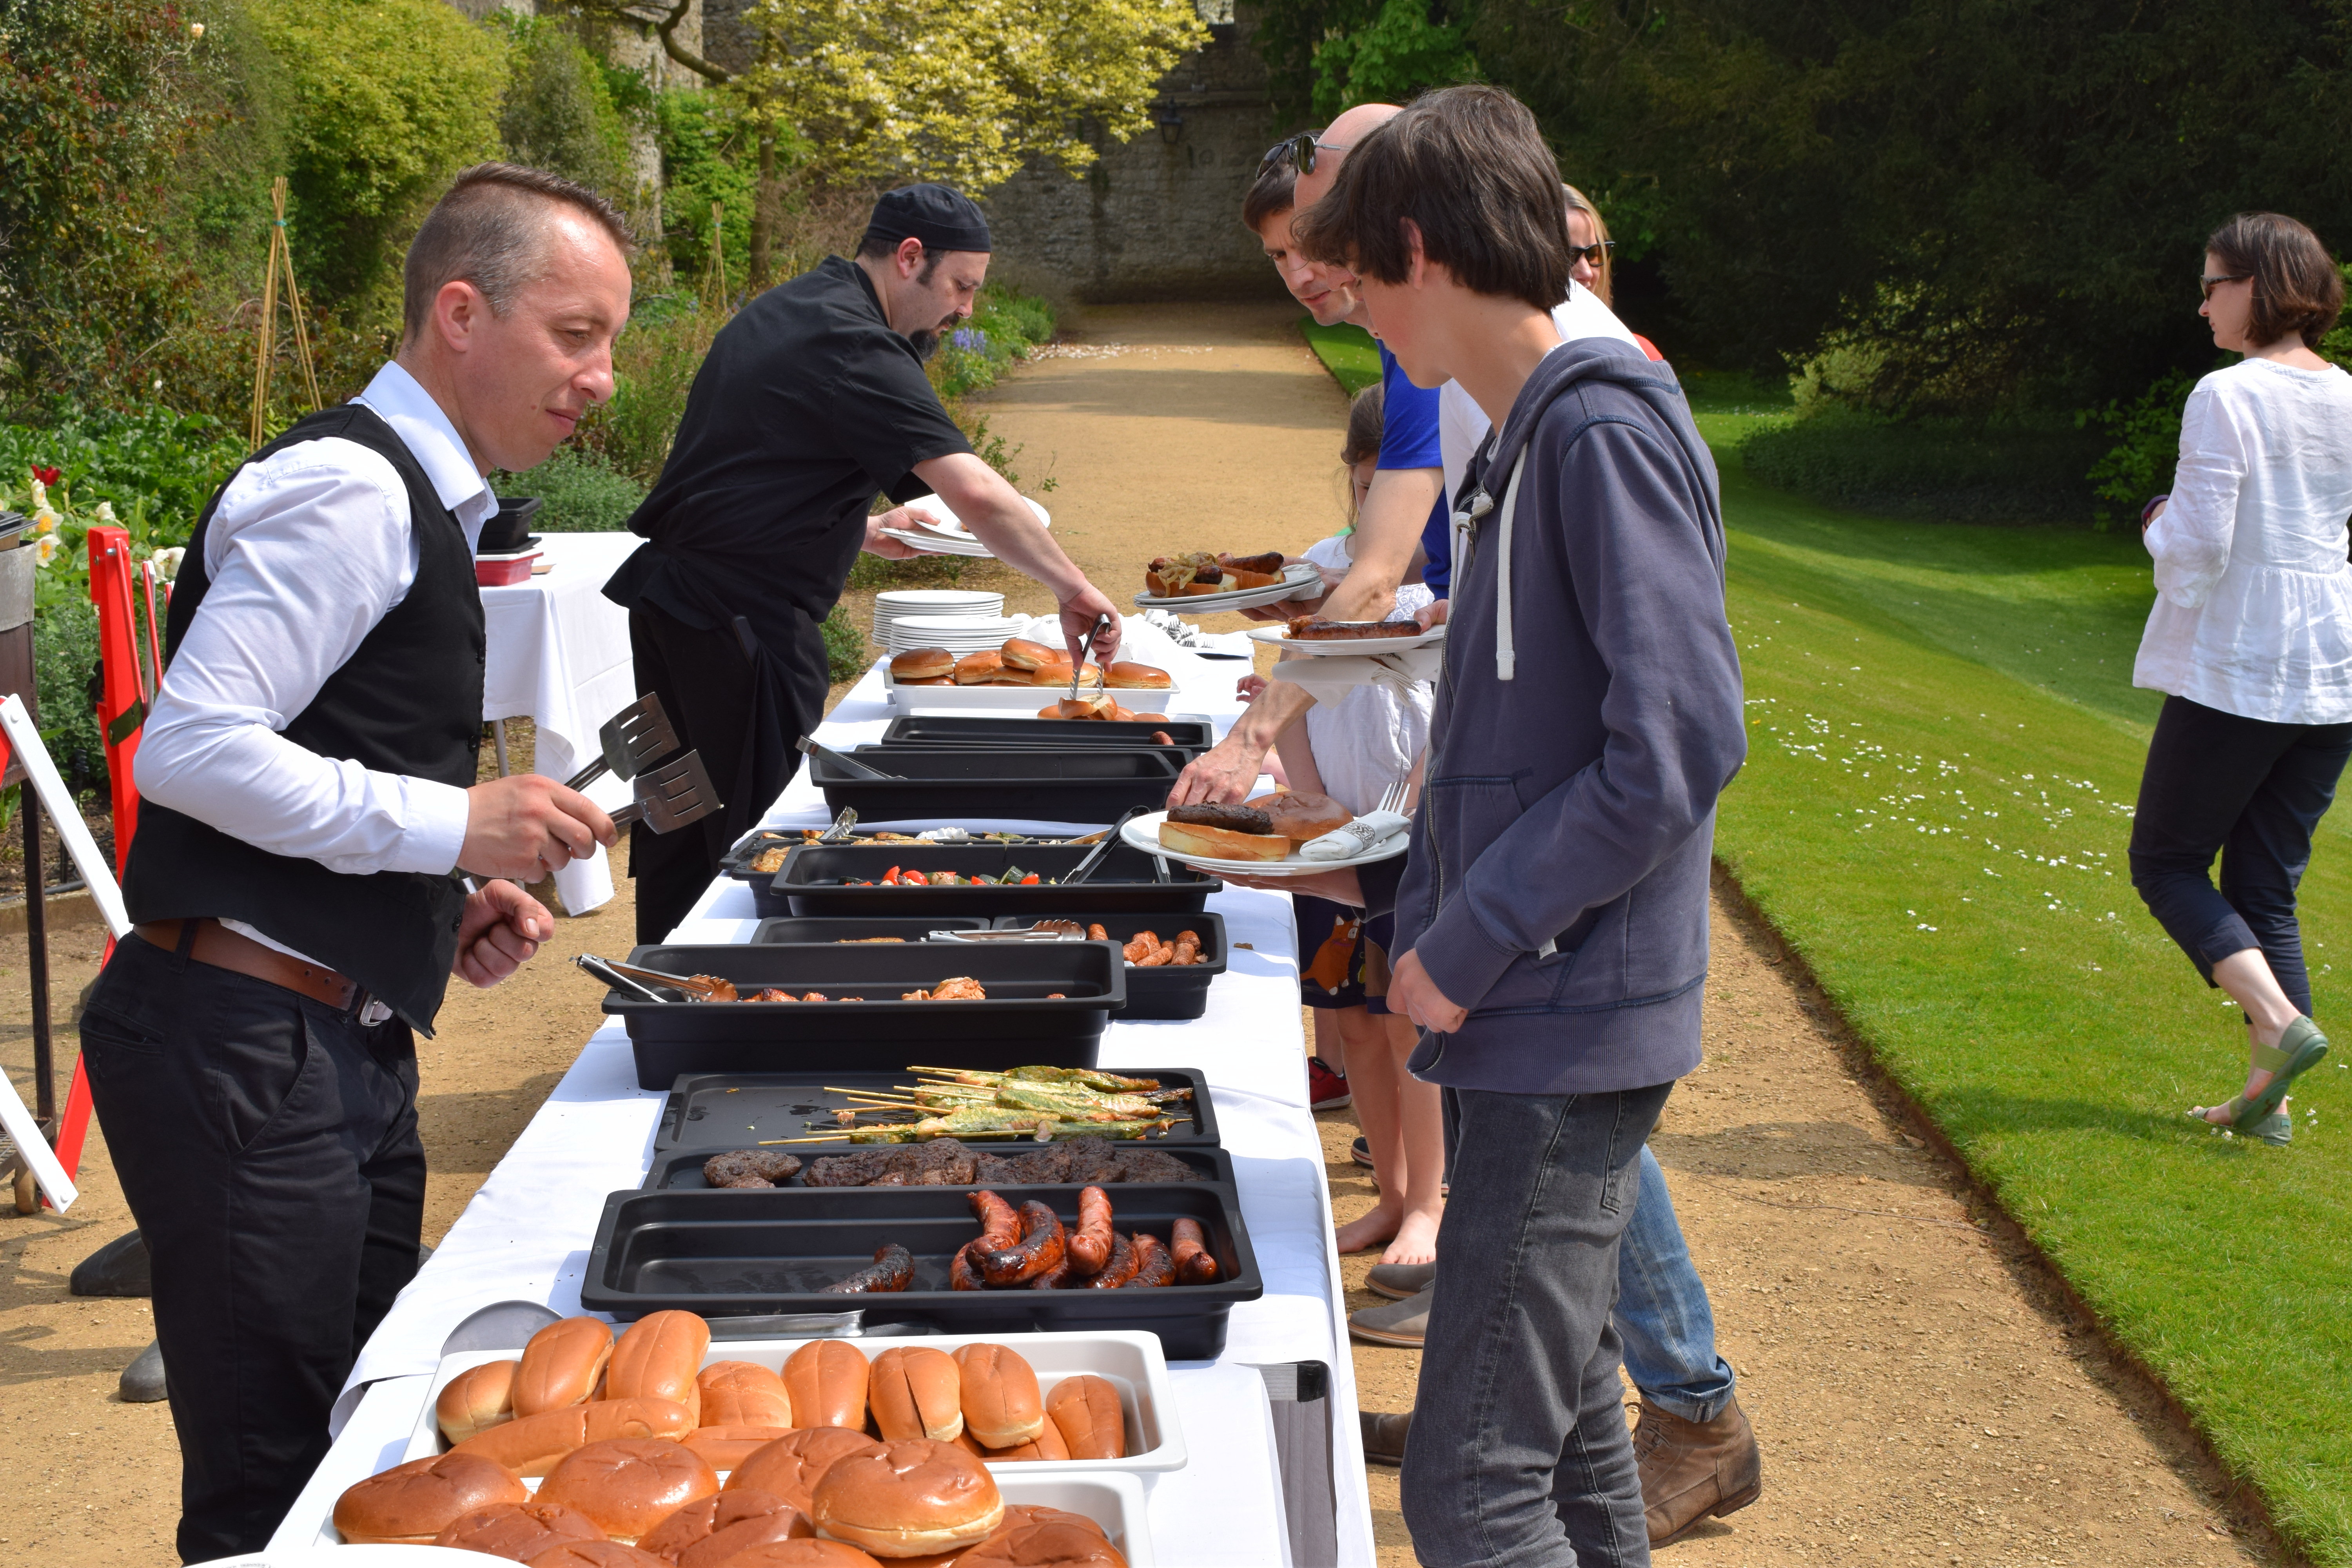 New College Society Garden Party and BBQ 2017